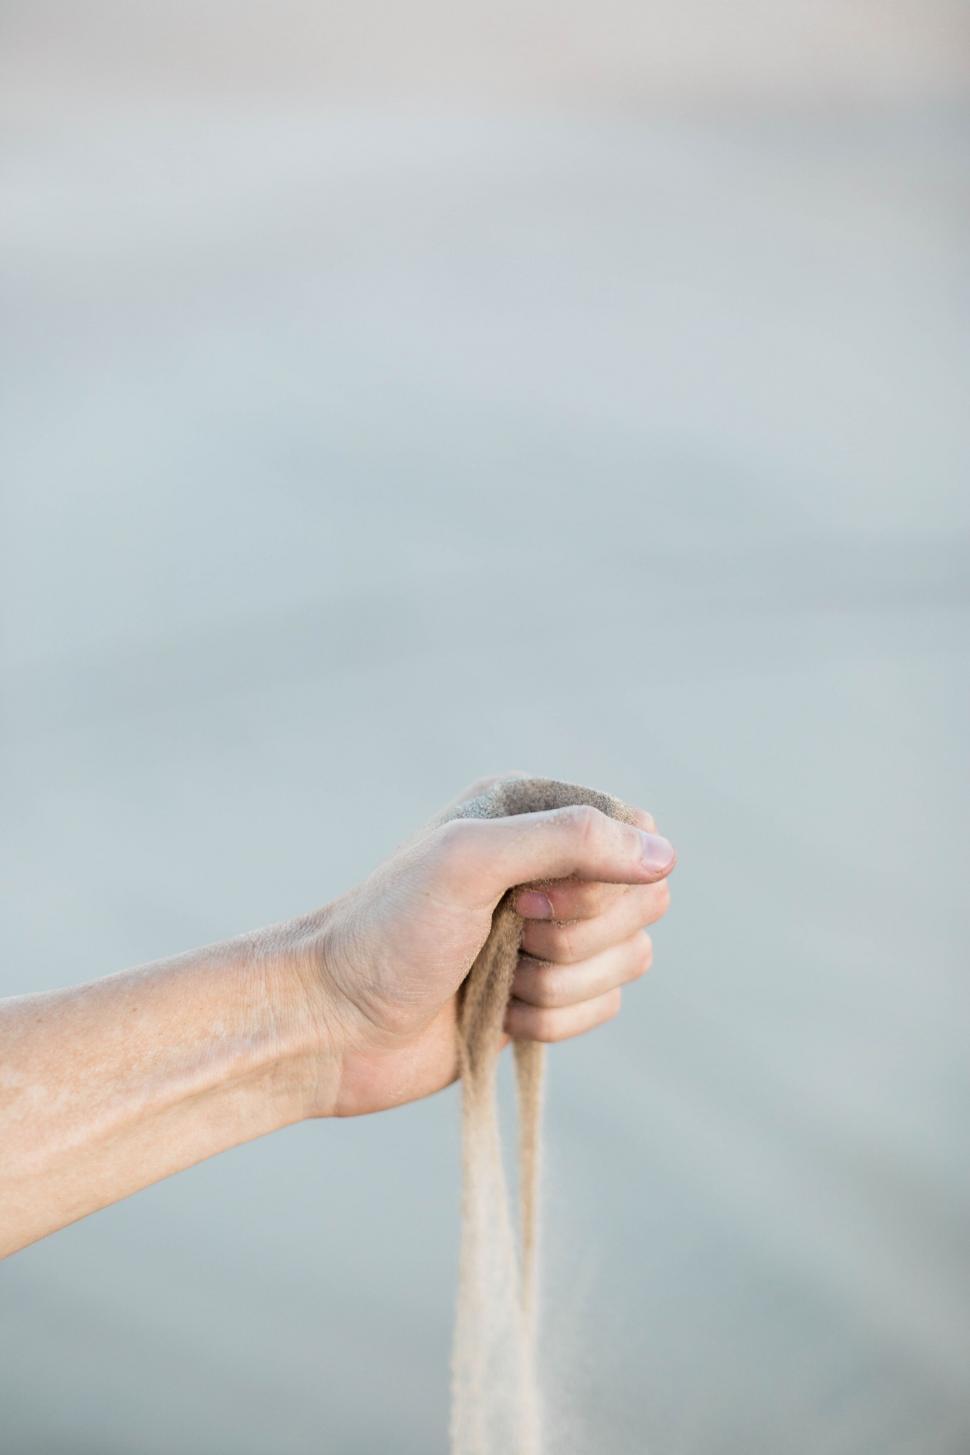 Free Image of Hand gripping a rope on a sandy background 